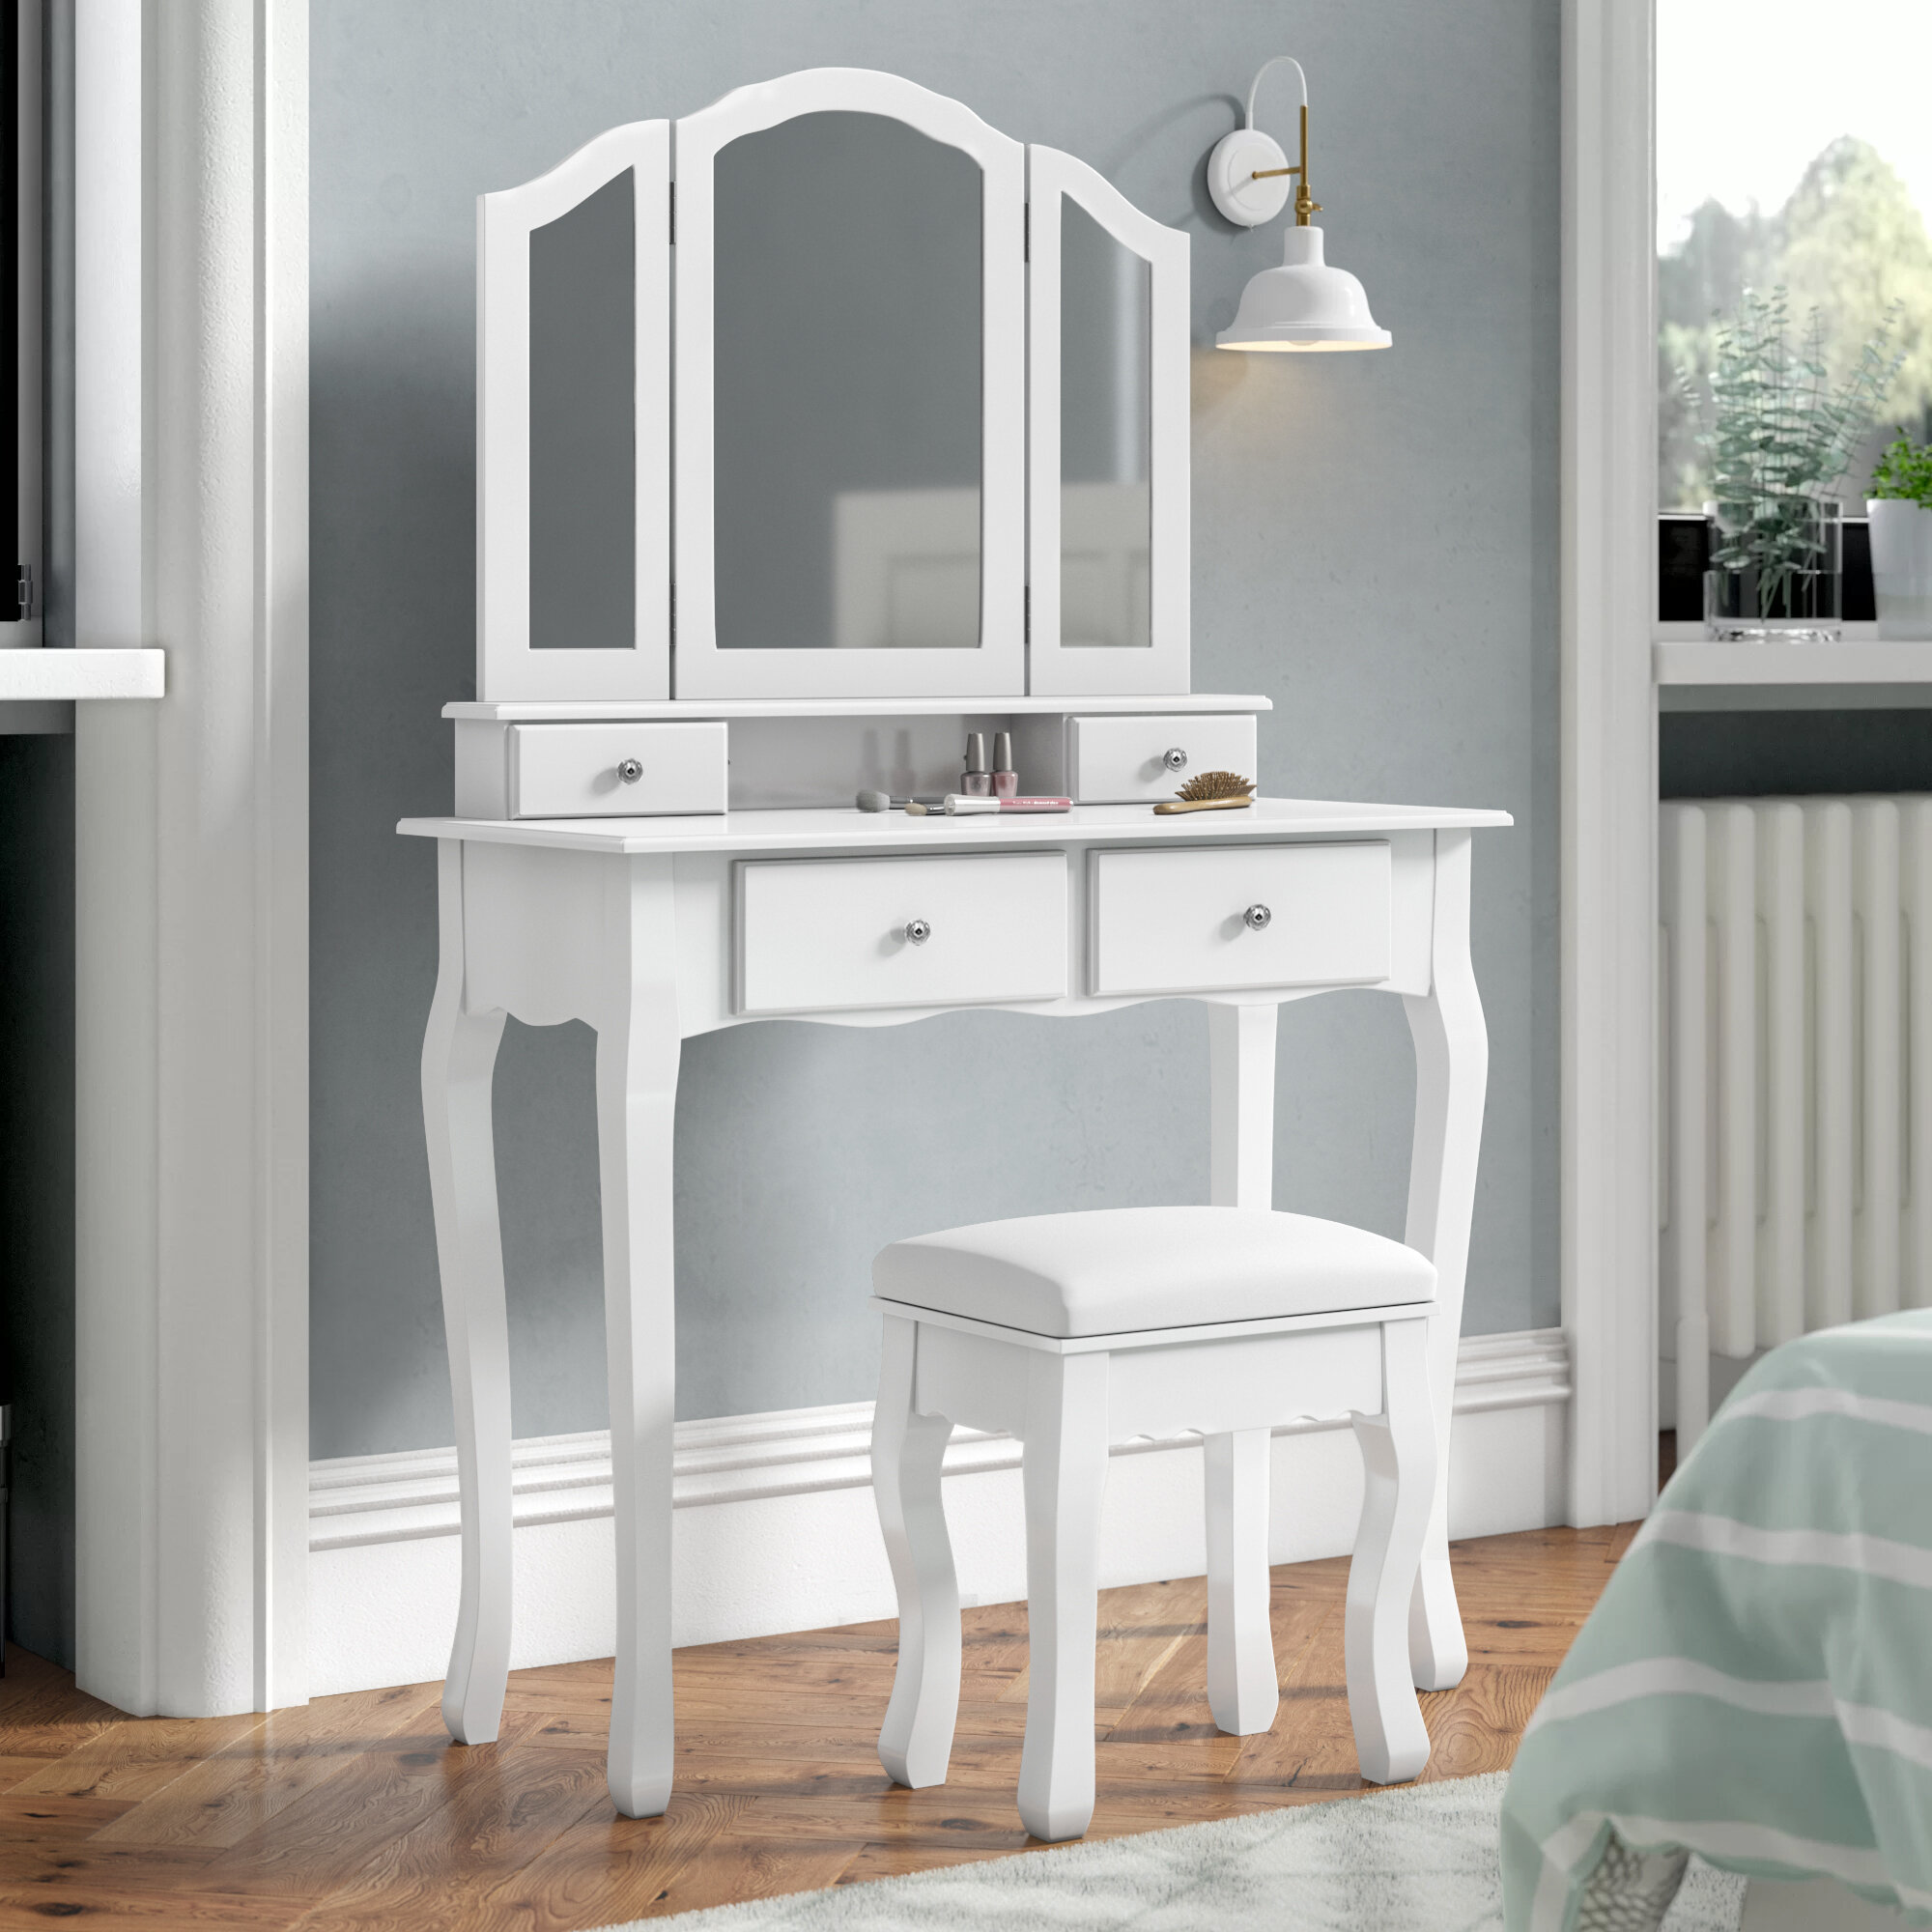 Lily Manor Amani Large Dressing Table Set With Mirror Reviews Wayfaircouk